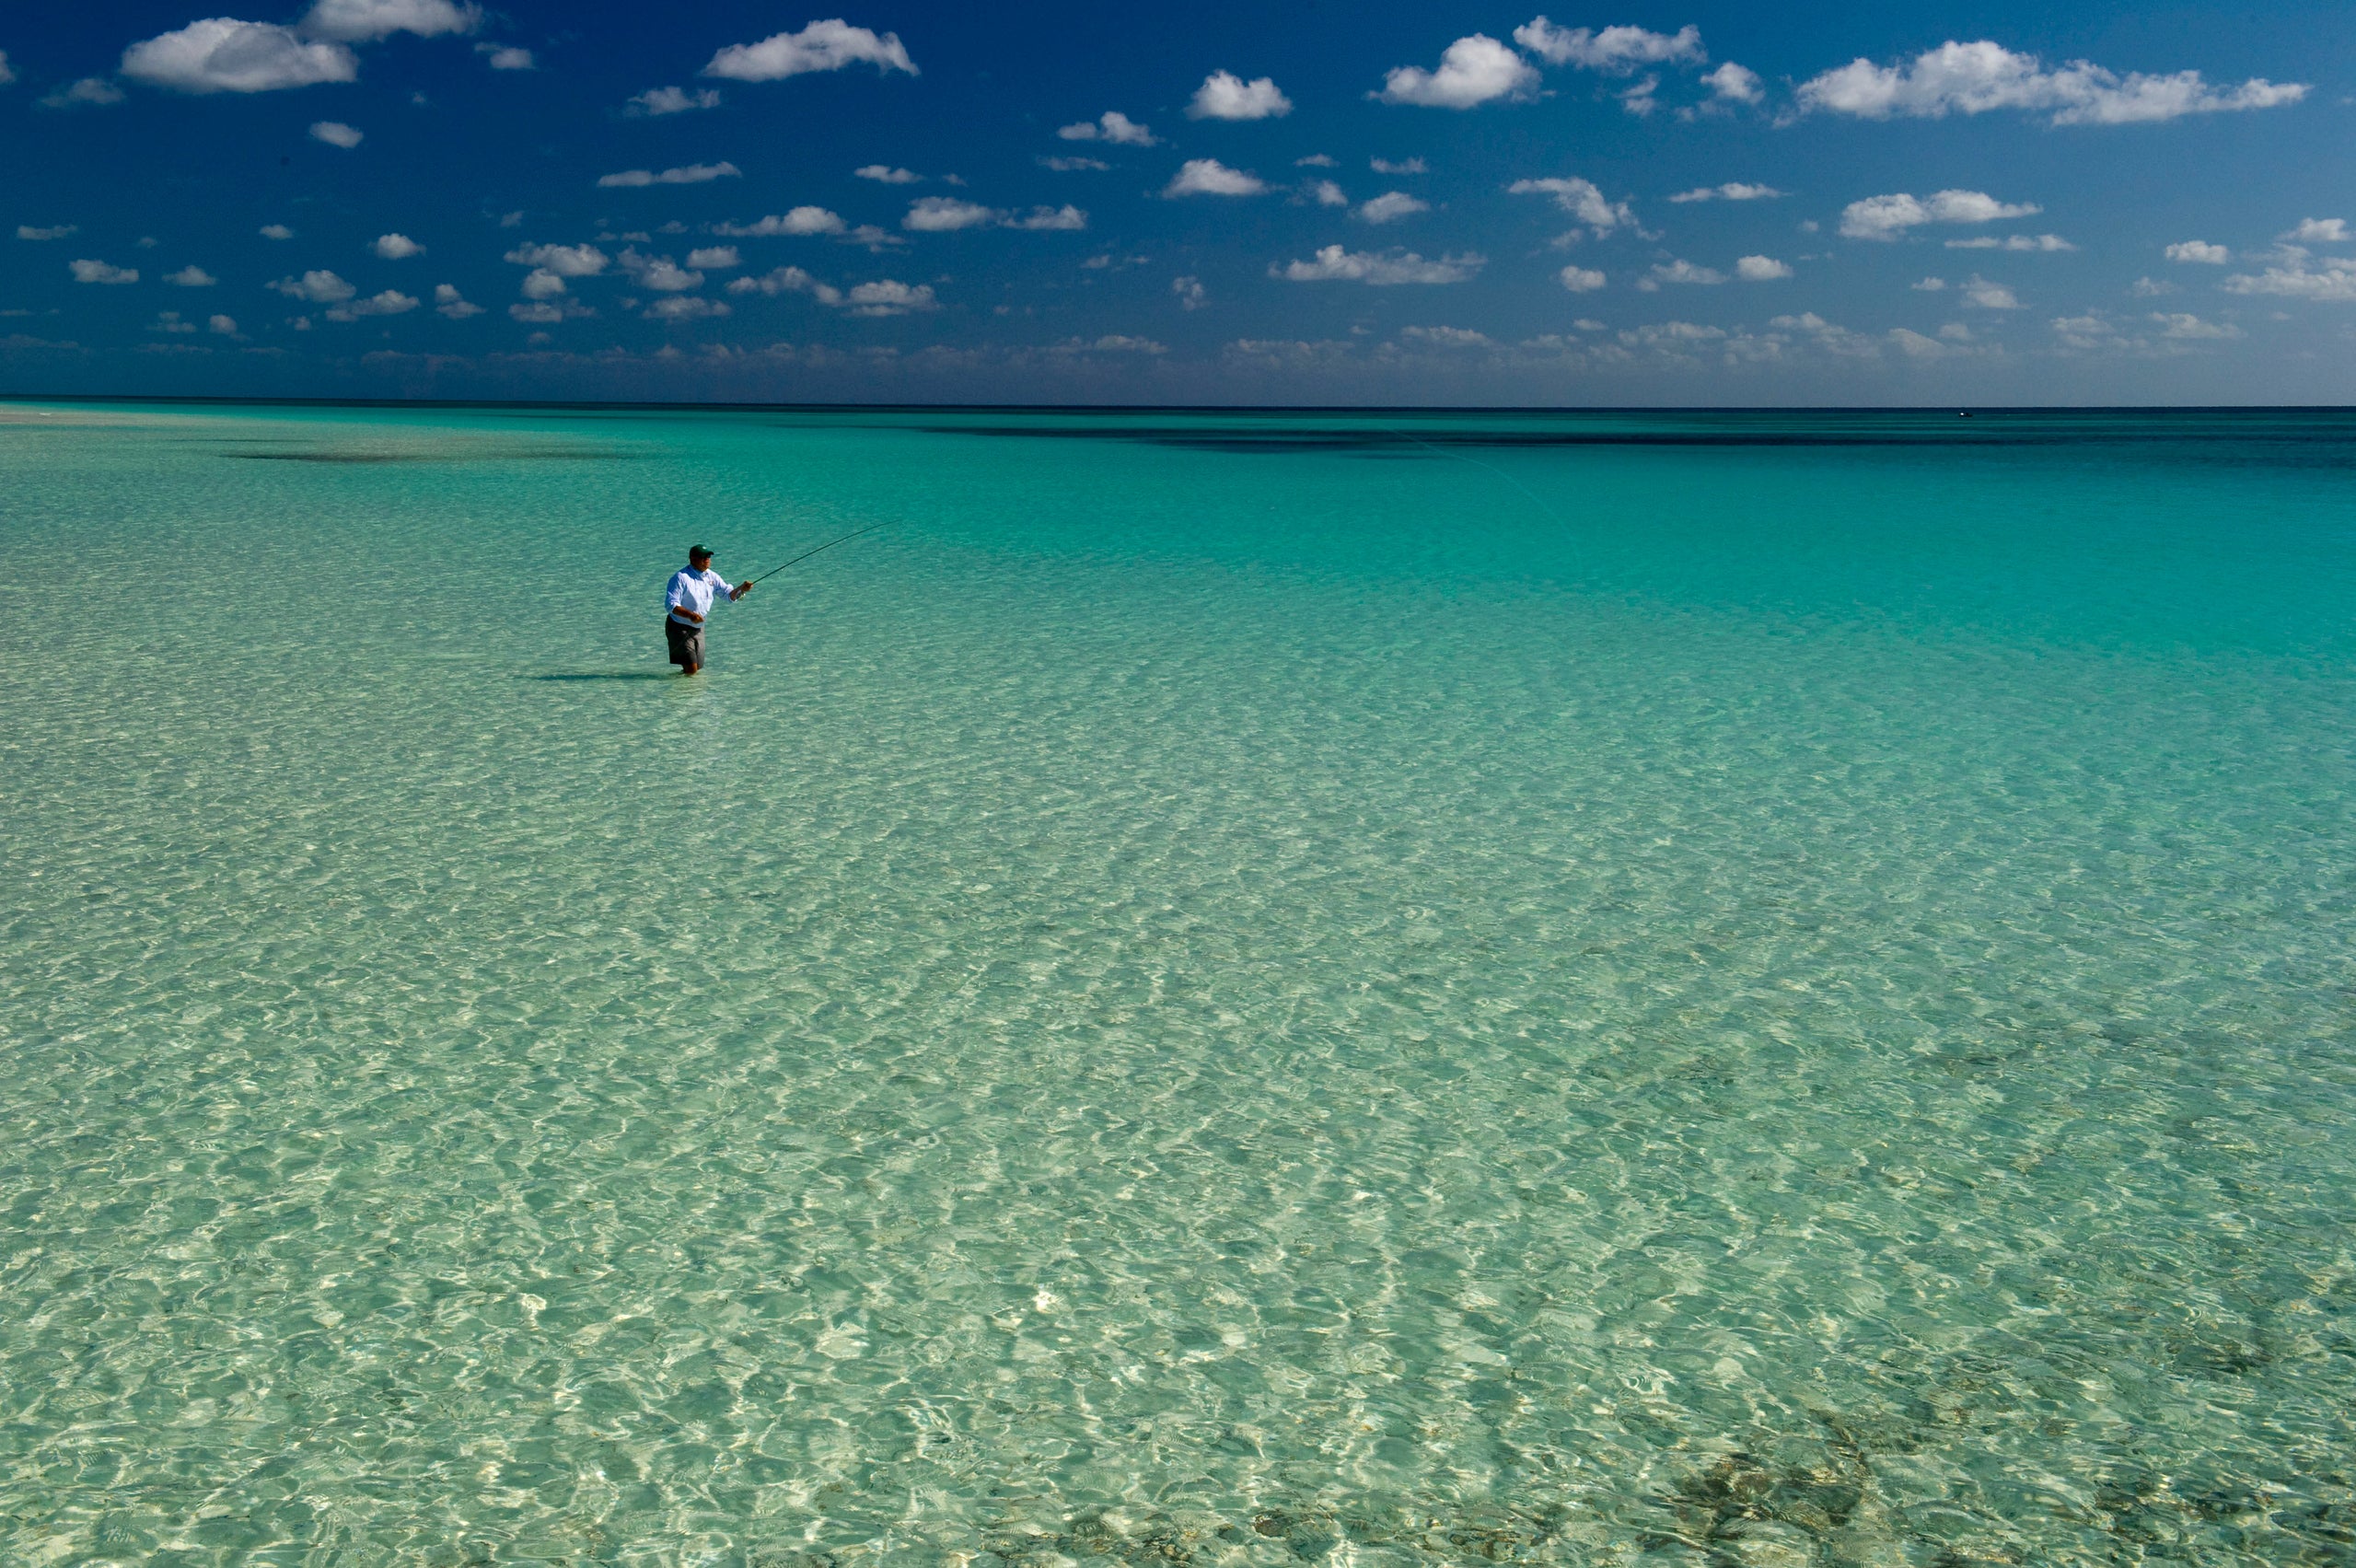 Telluride Angler's Fly Fishing Gear Guide for the Bahamas